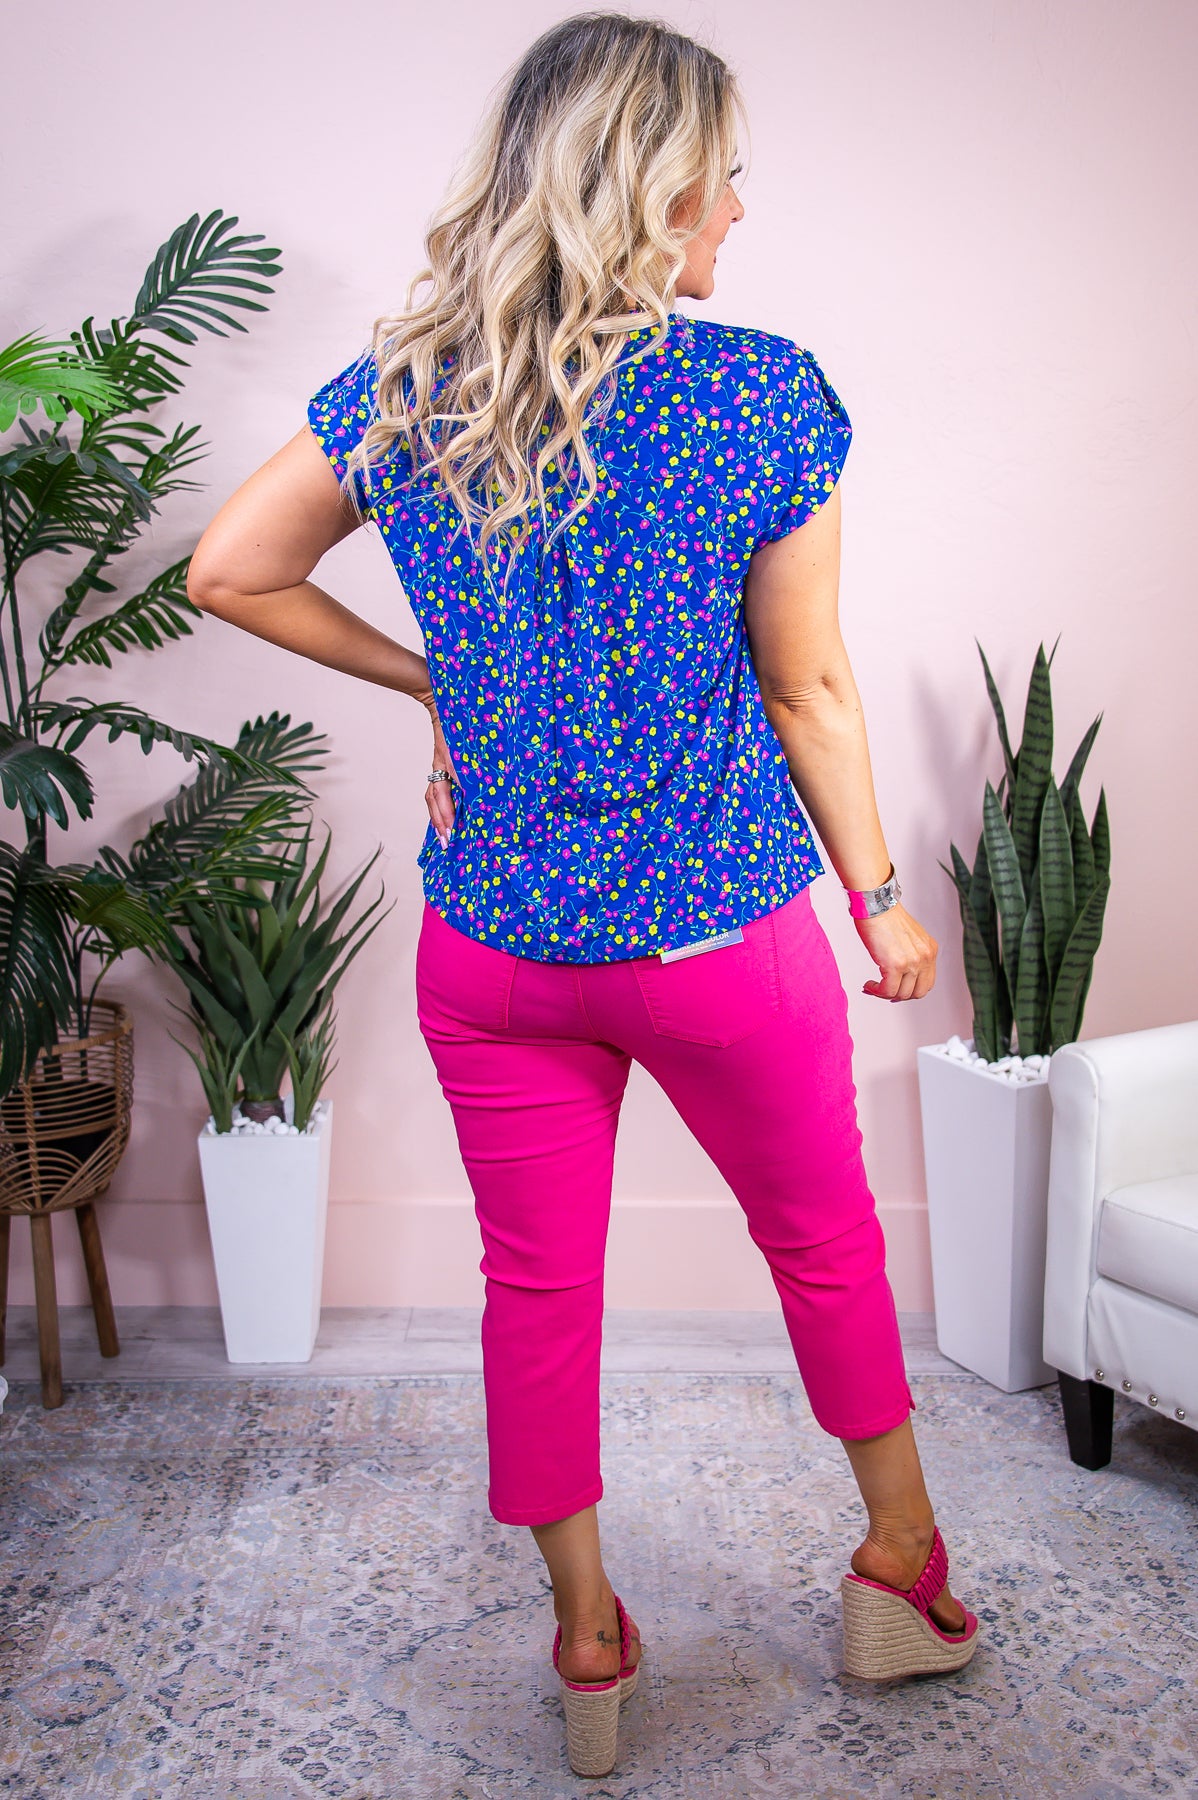 Worthy Of Roses Royal Blue/Multi Color Floral Top - T9189RBL